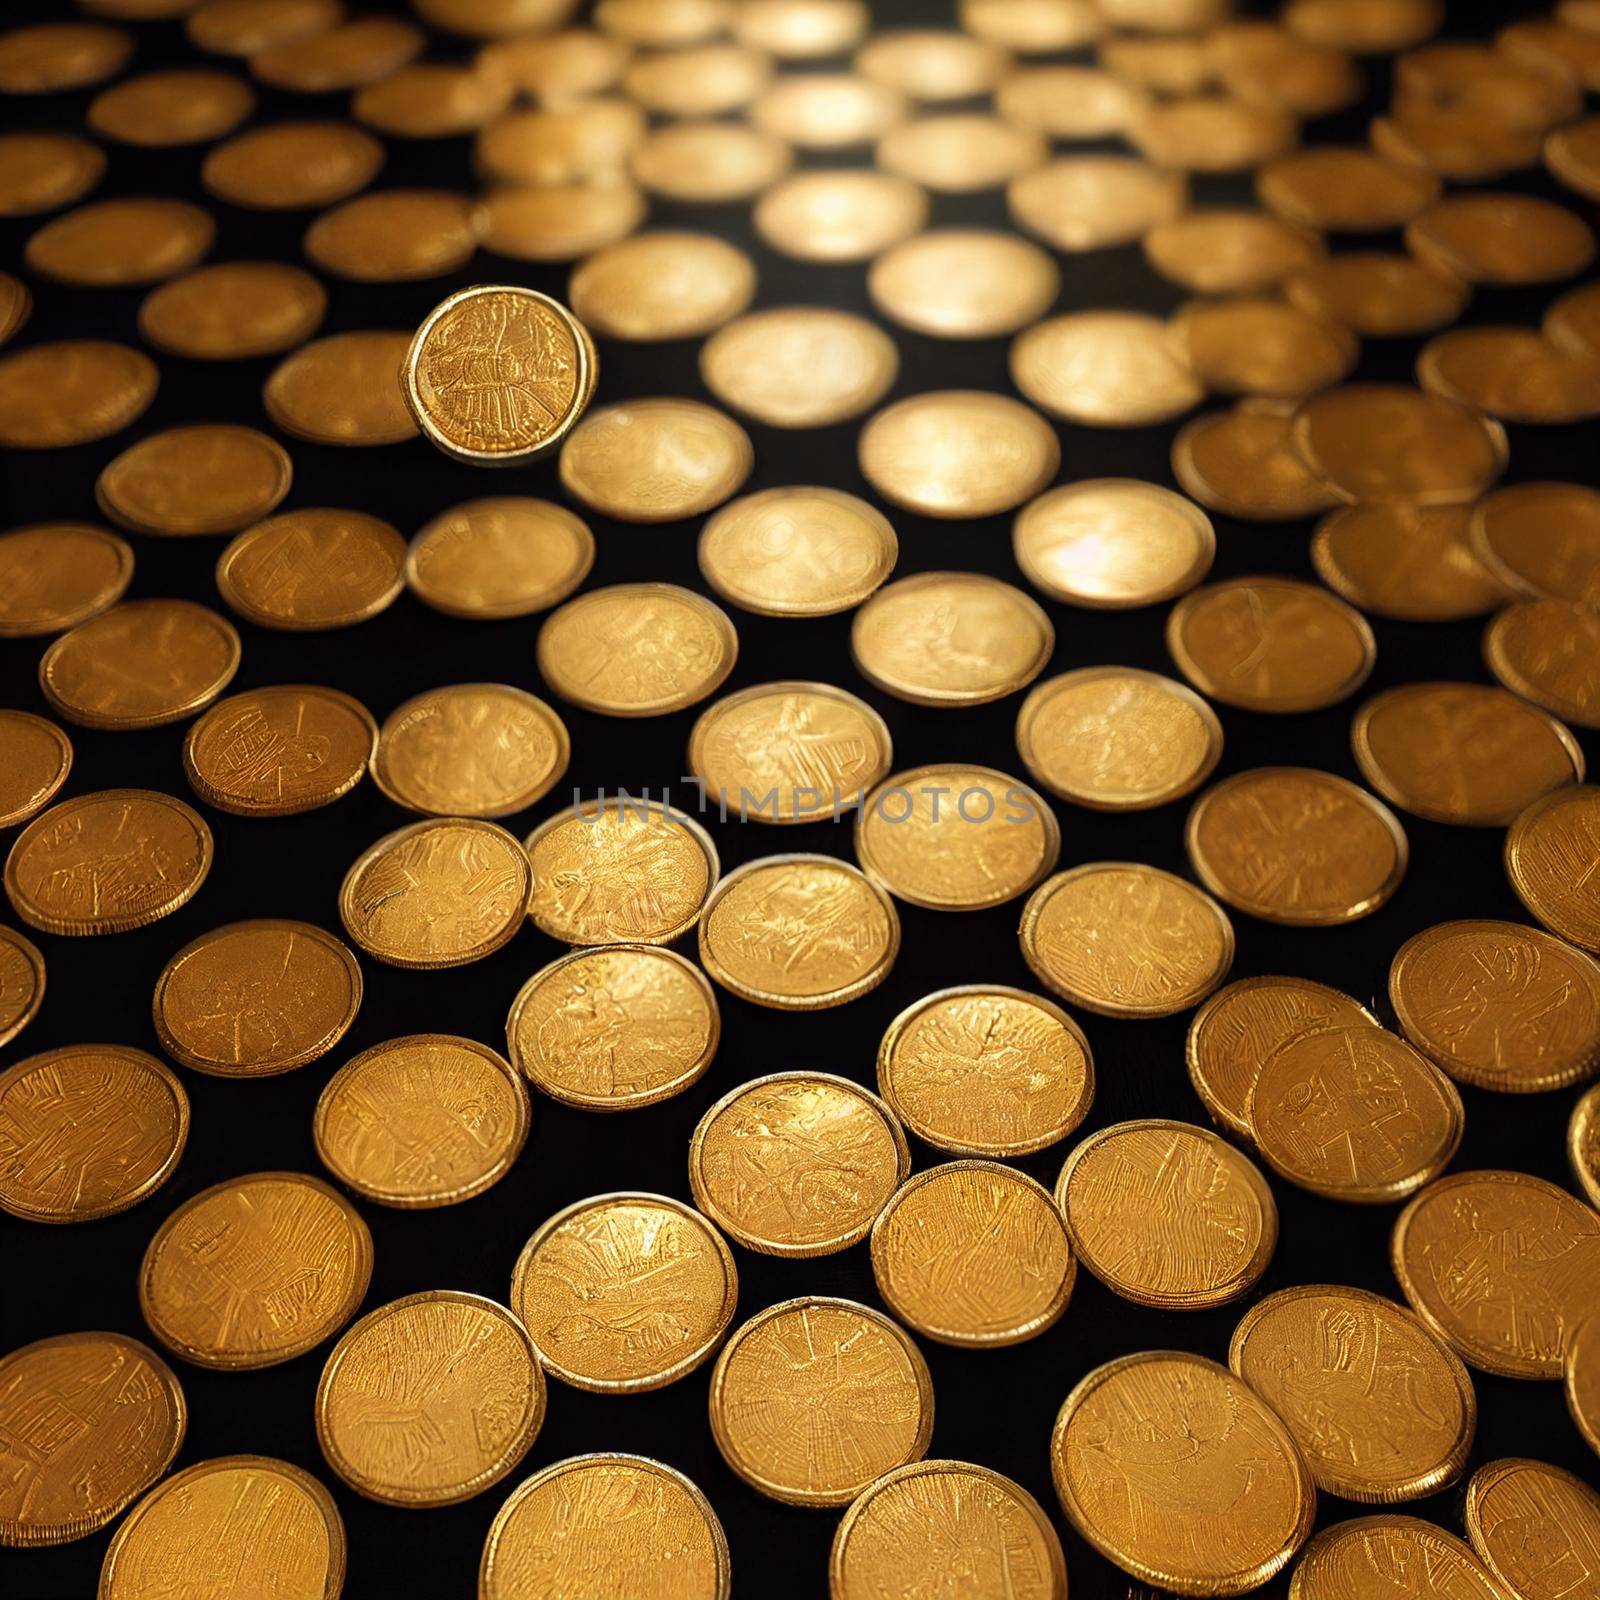 Gold coins on the table by NeuroSky